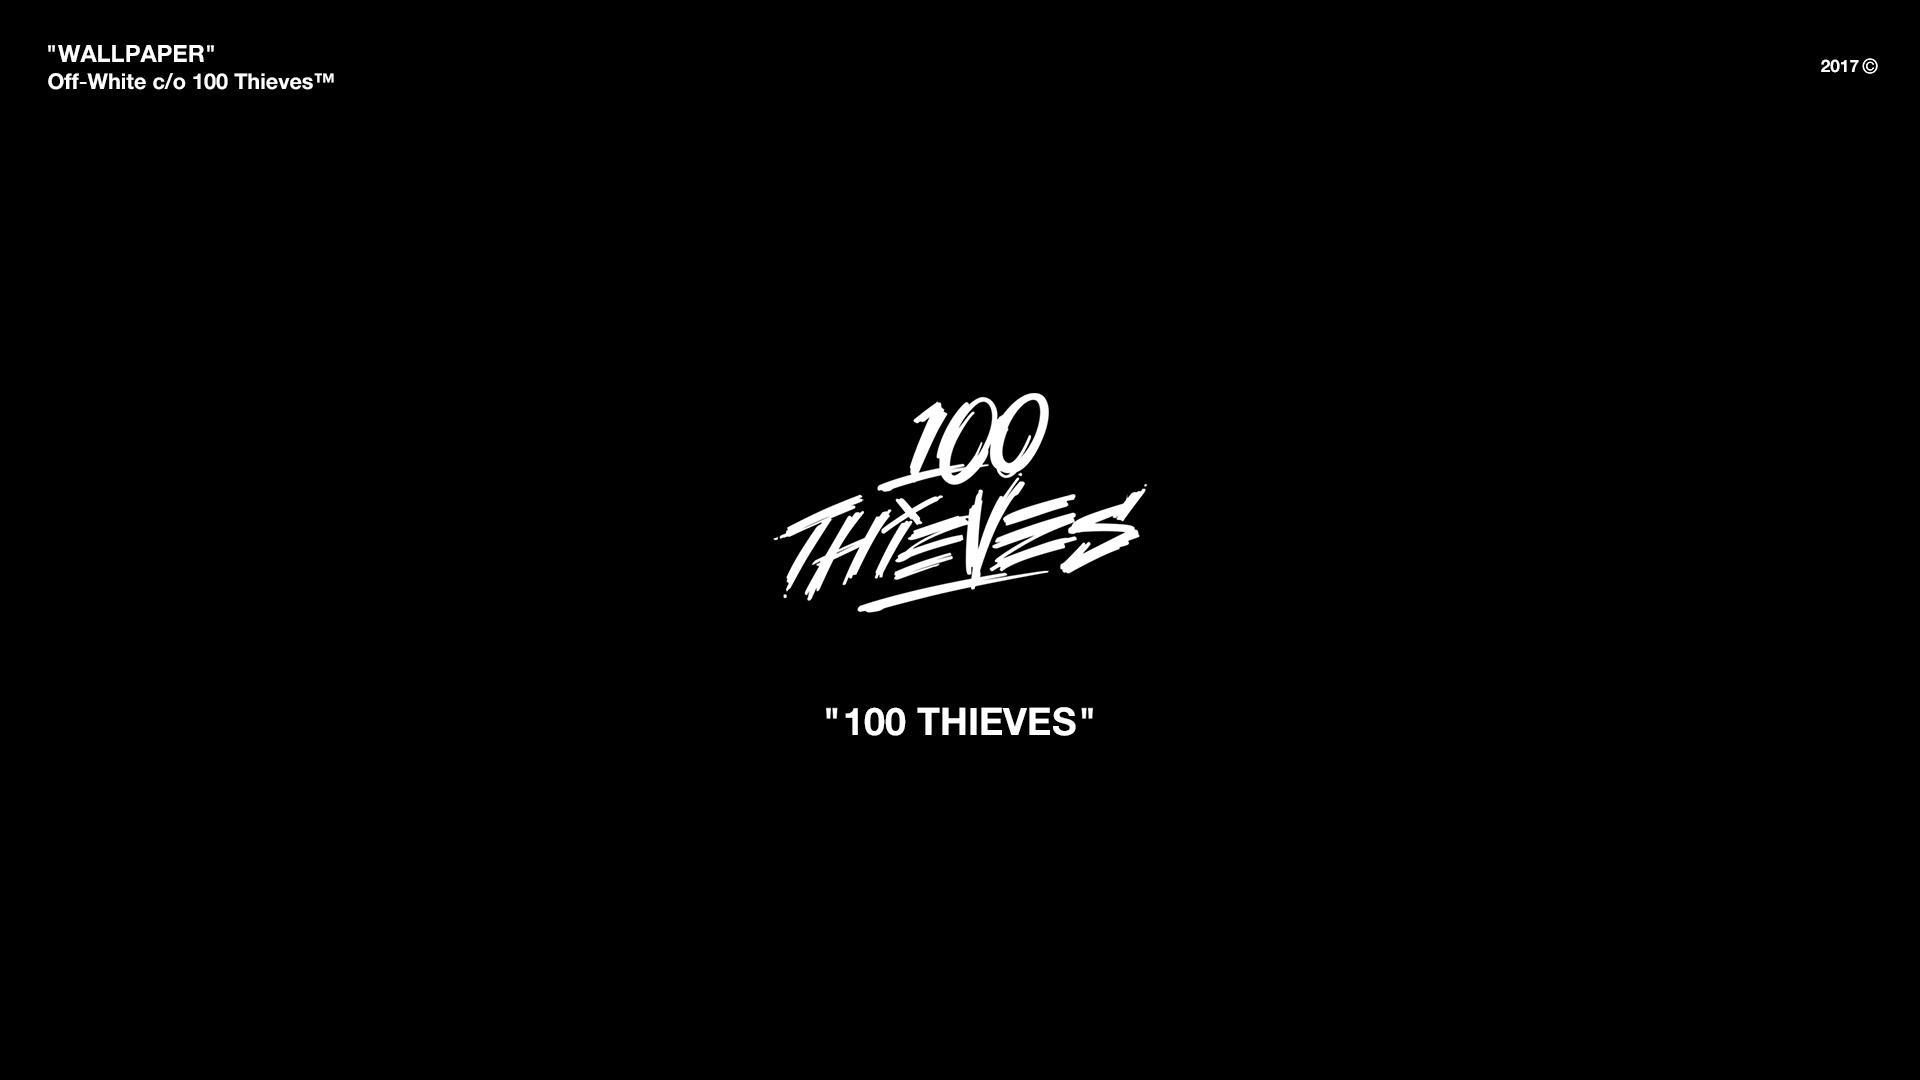 100 Thieves wallpaper by Togaaa  Download on ZEDGE  c311